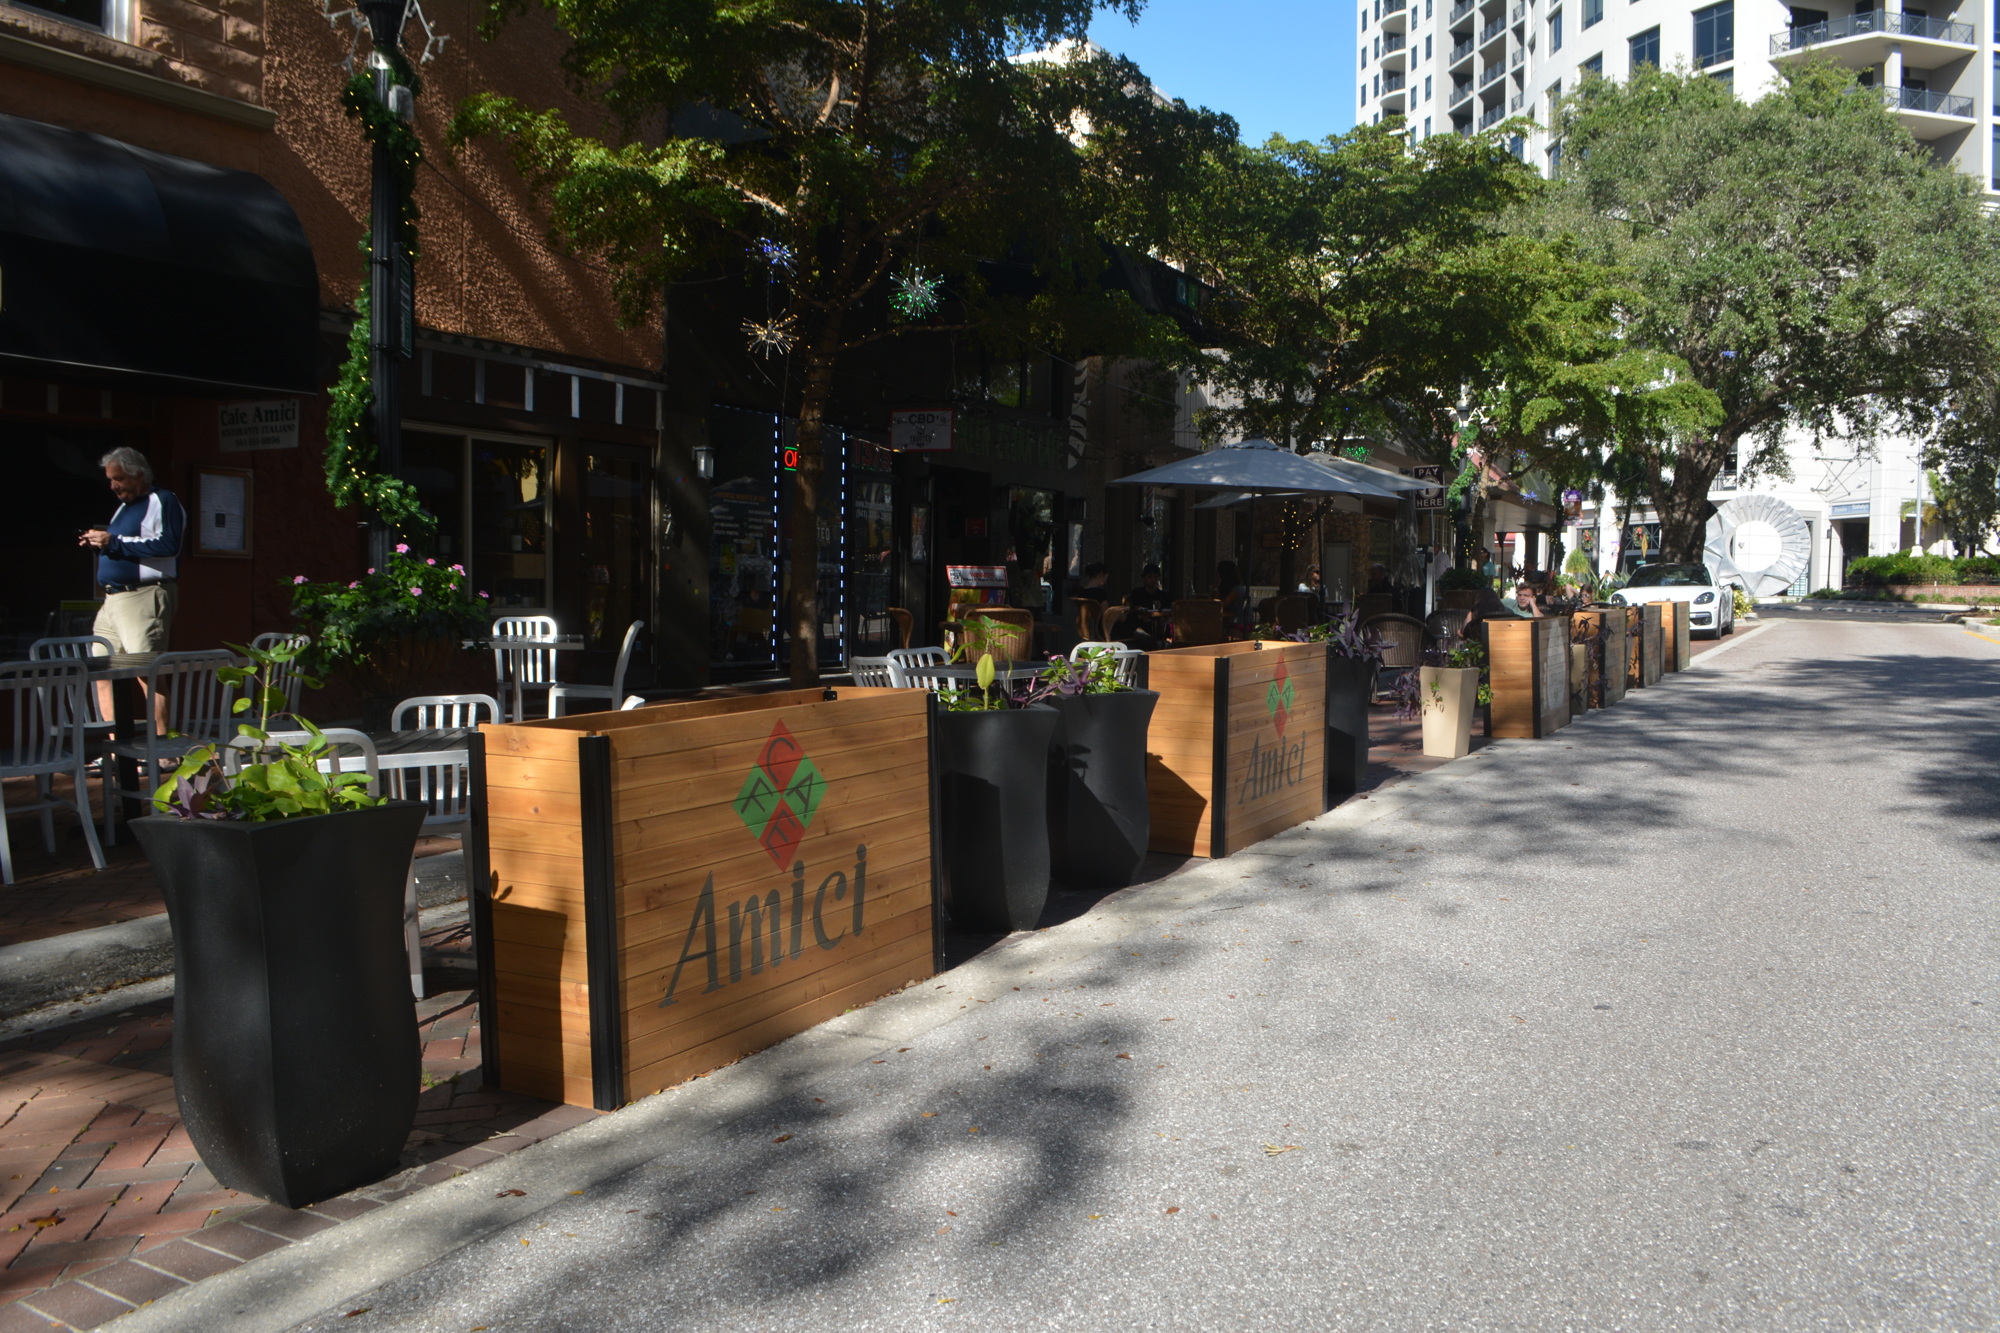 Businesses such as Green Zebra Café and Café Amici have invested in more substantive dividers between their expanded outdoor seating areas and the road.